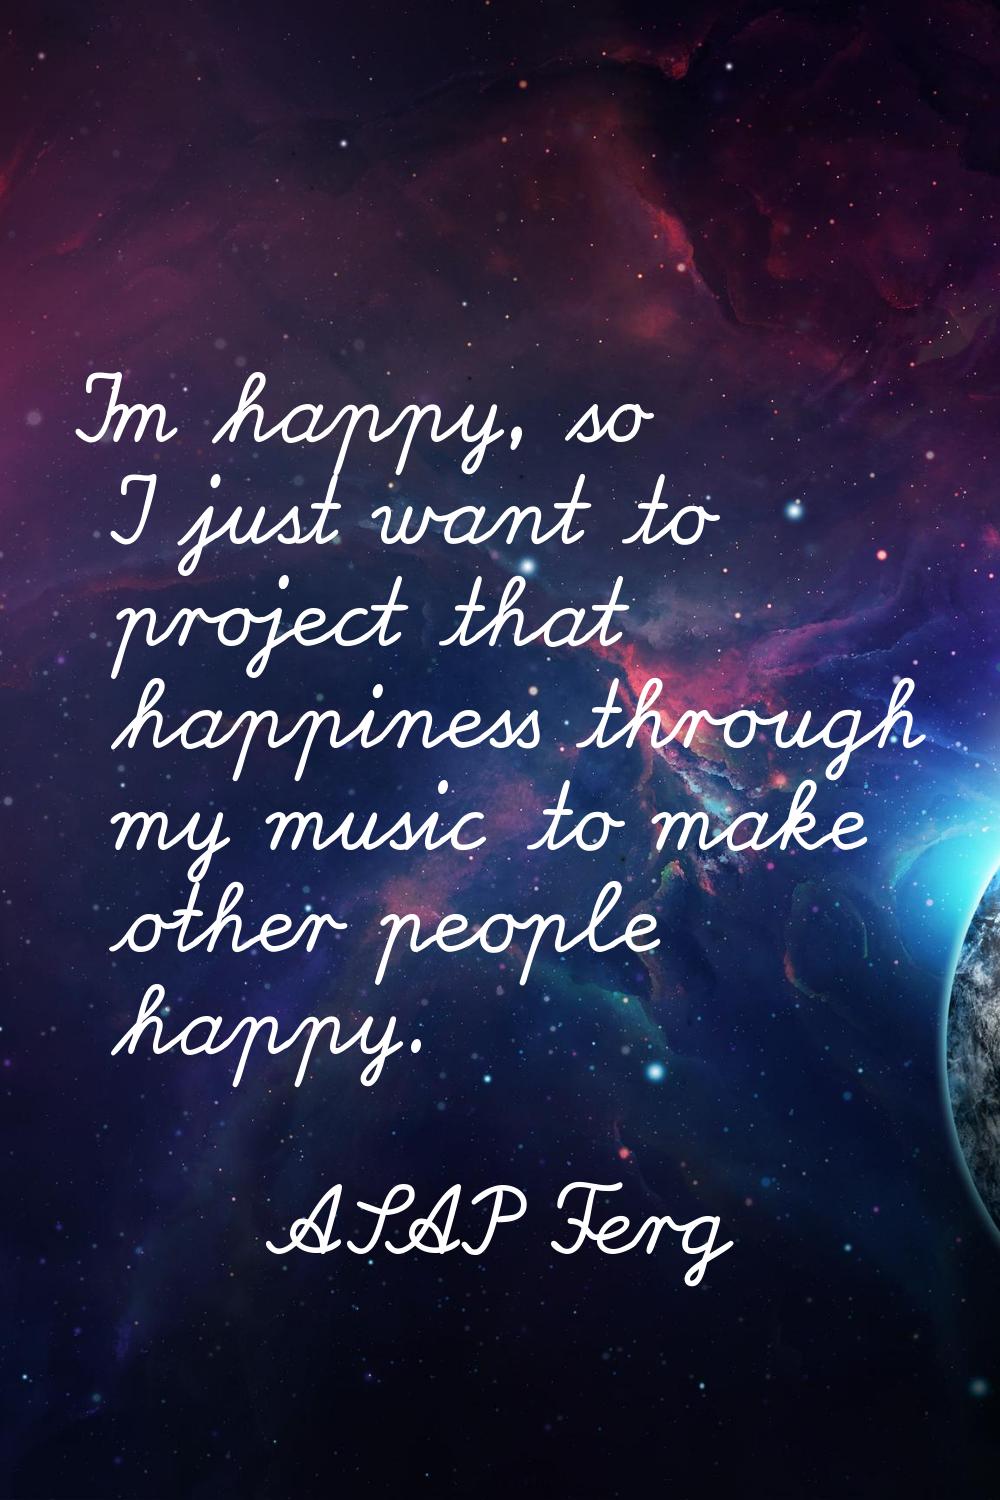 I'm happy, so I just want to project that happiness through my music to make other people happy.